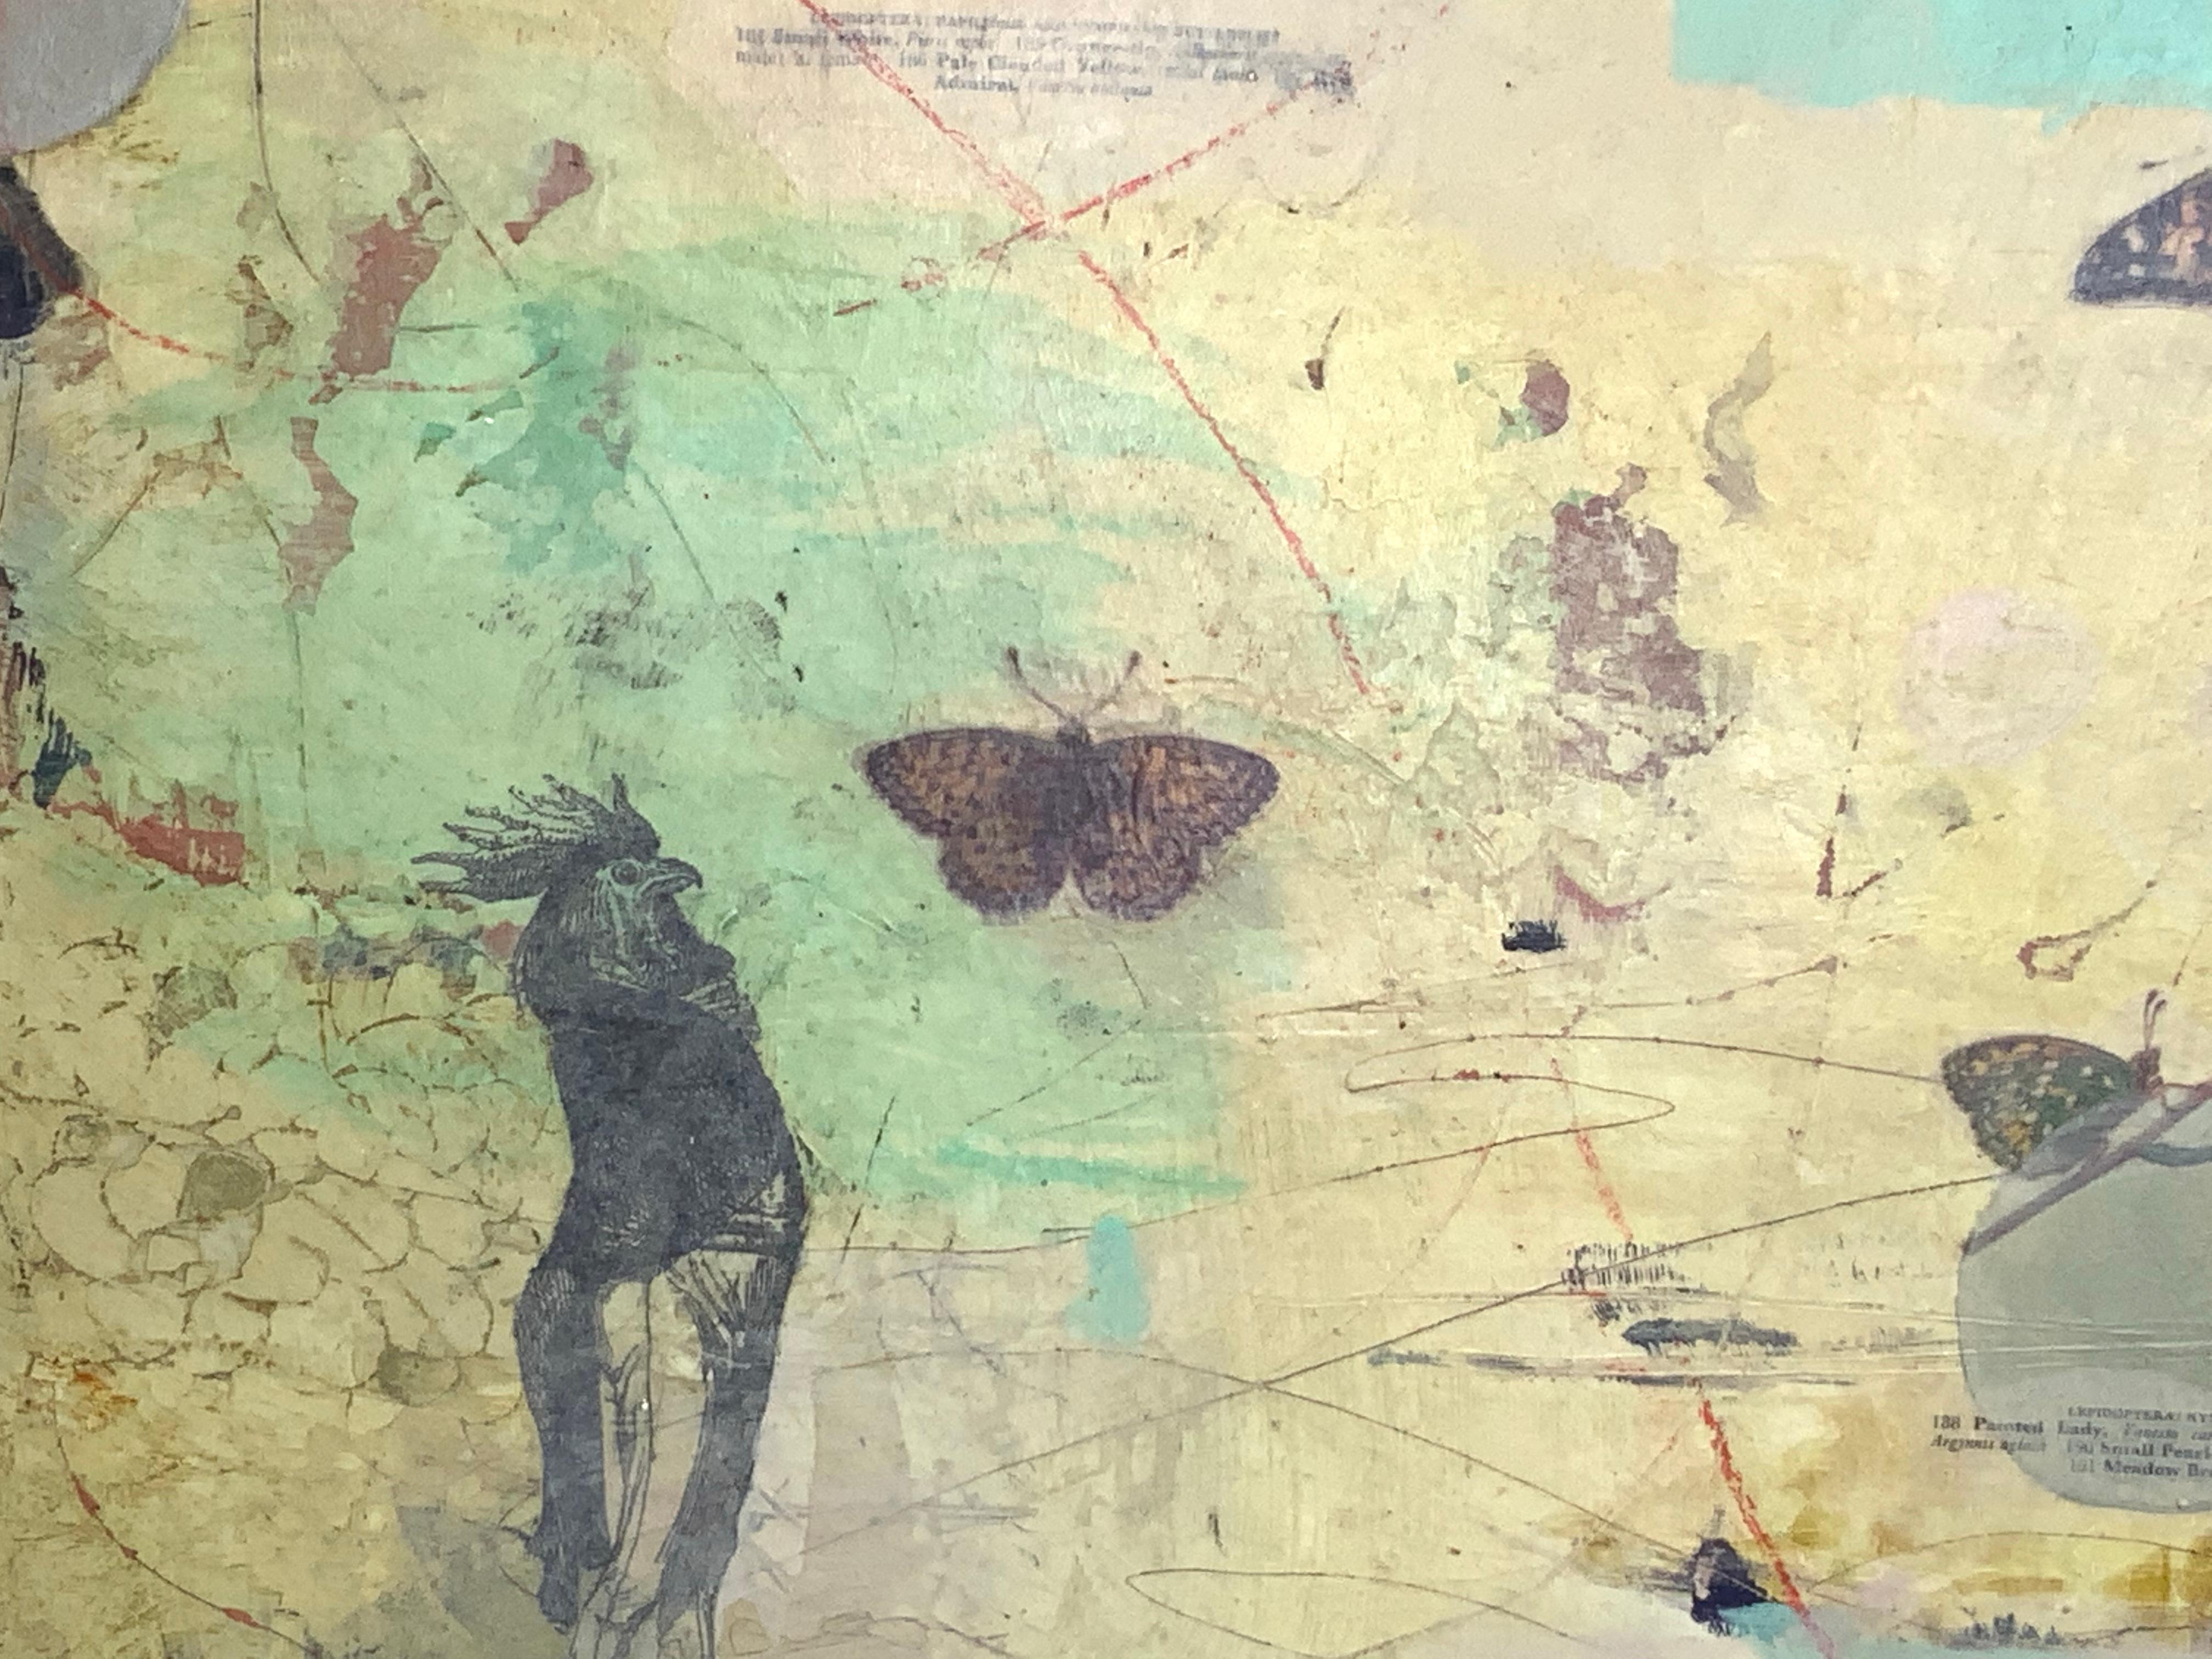 Chasing Butterflies, Original Painting - Contemporary Mixed Media Art by Steph Gimson